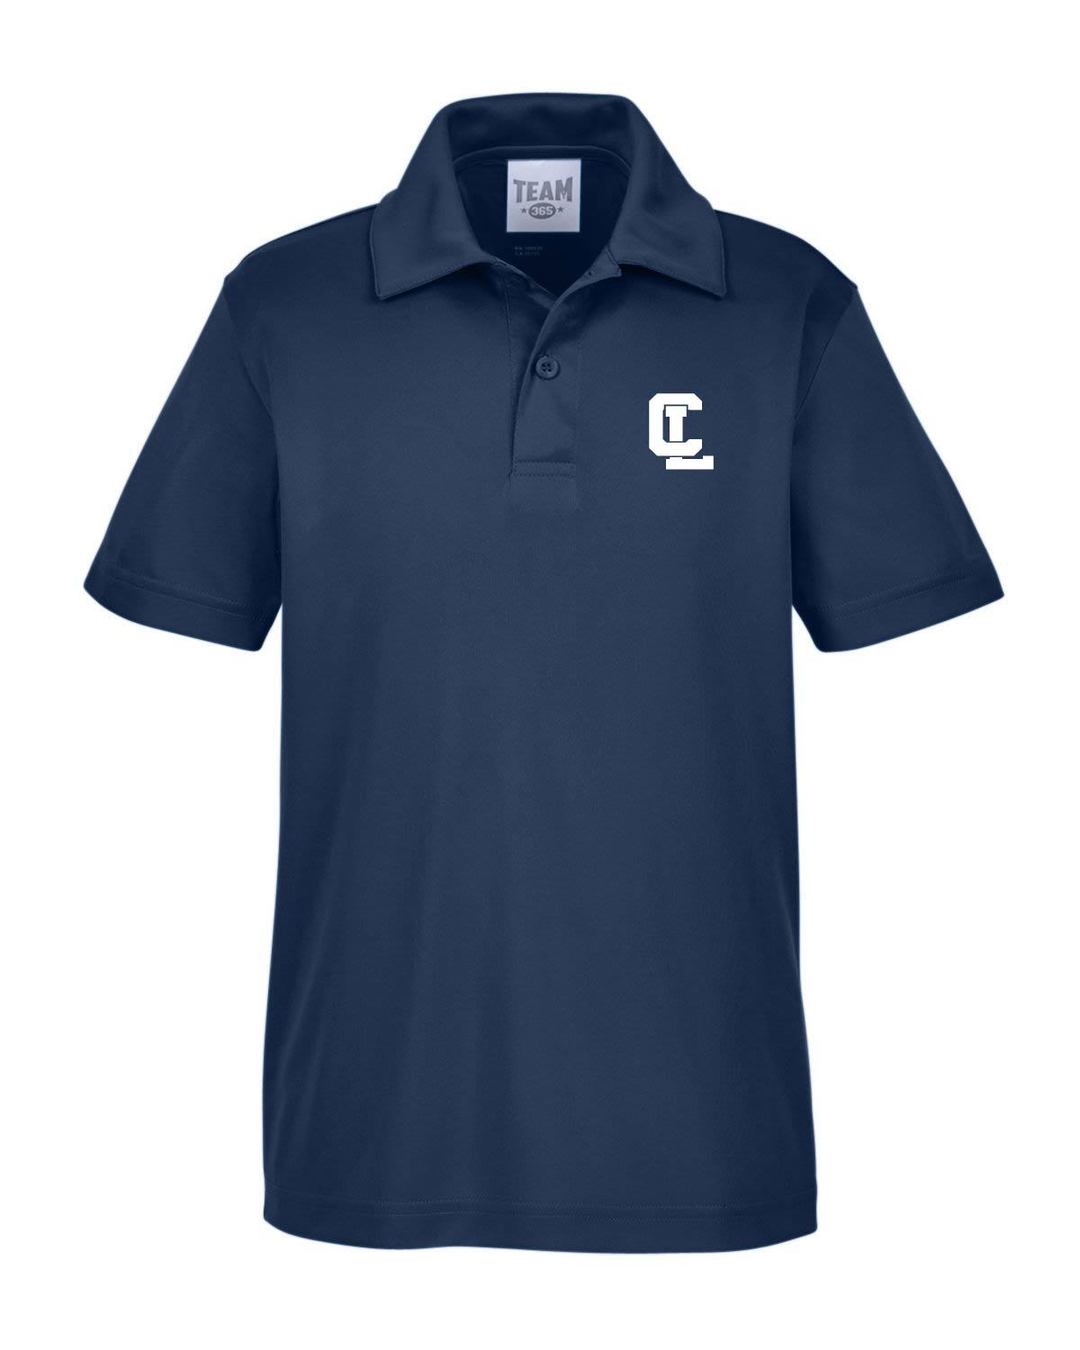 Youth TEAM Performance Polo